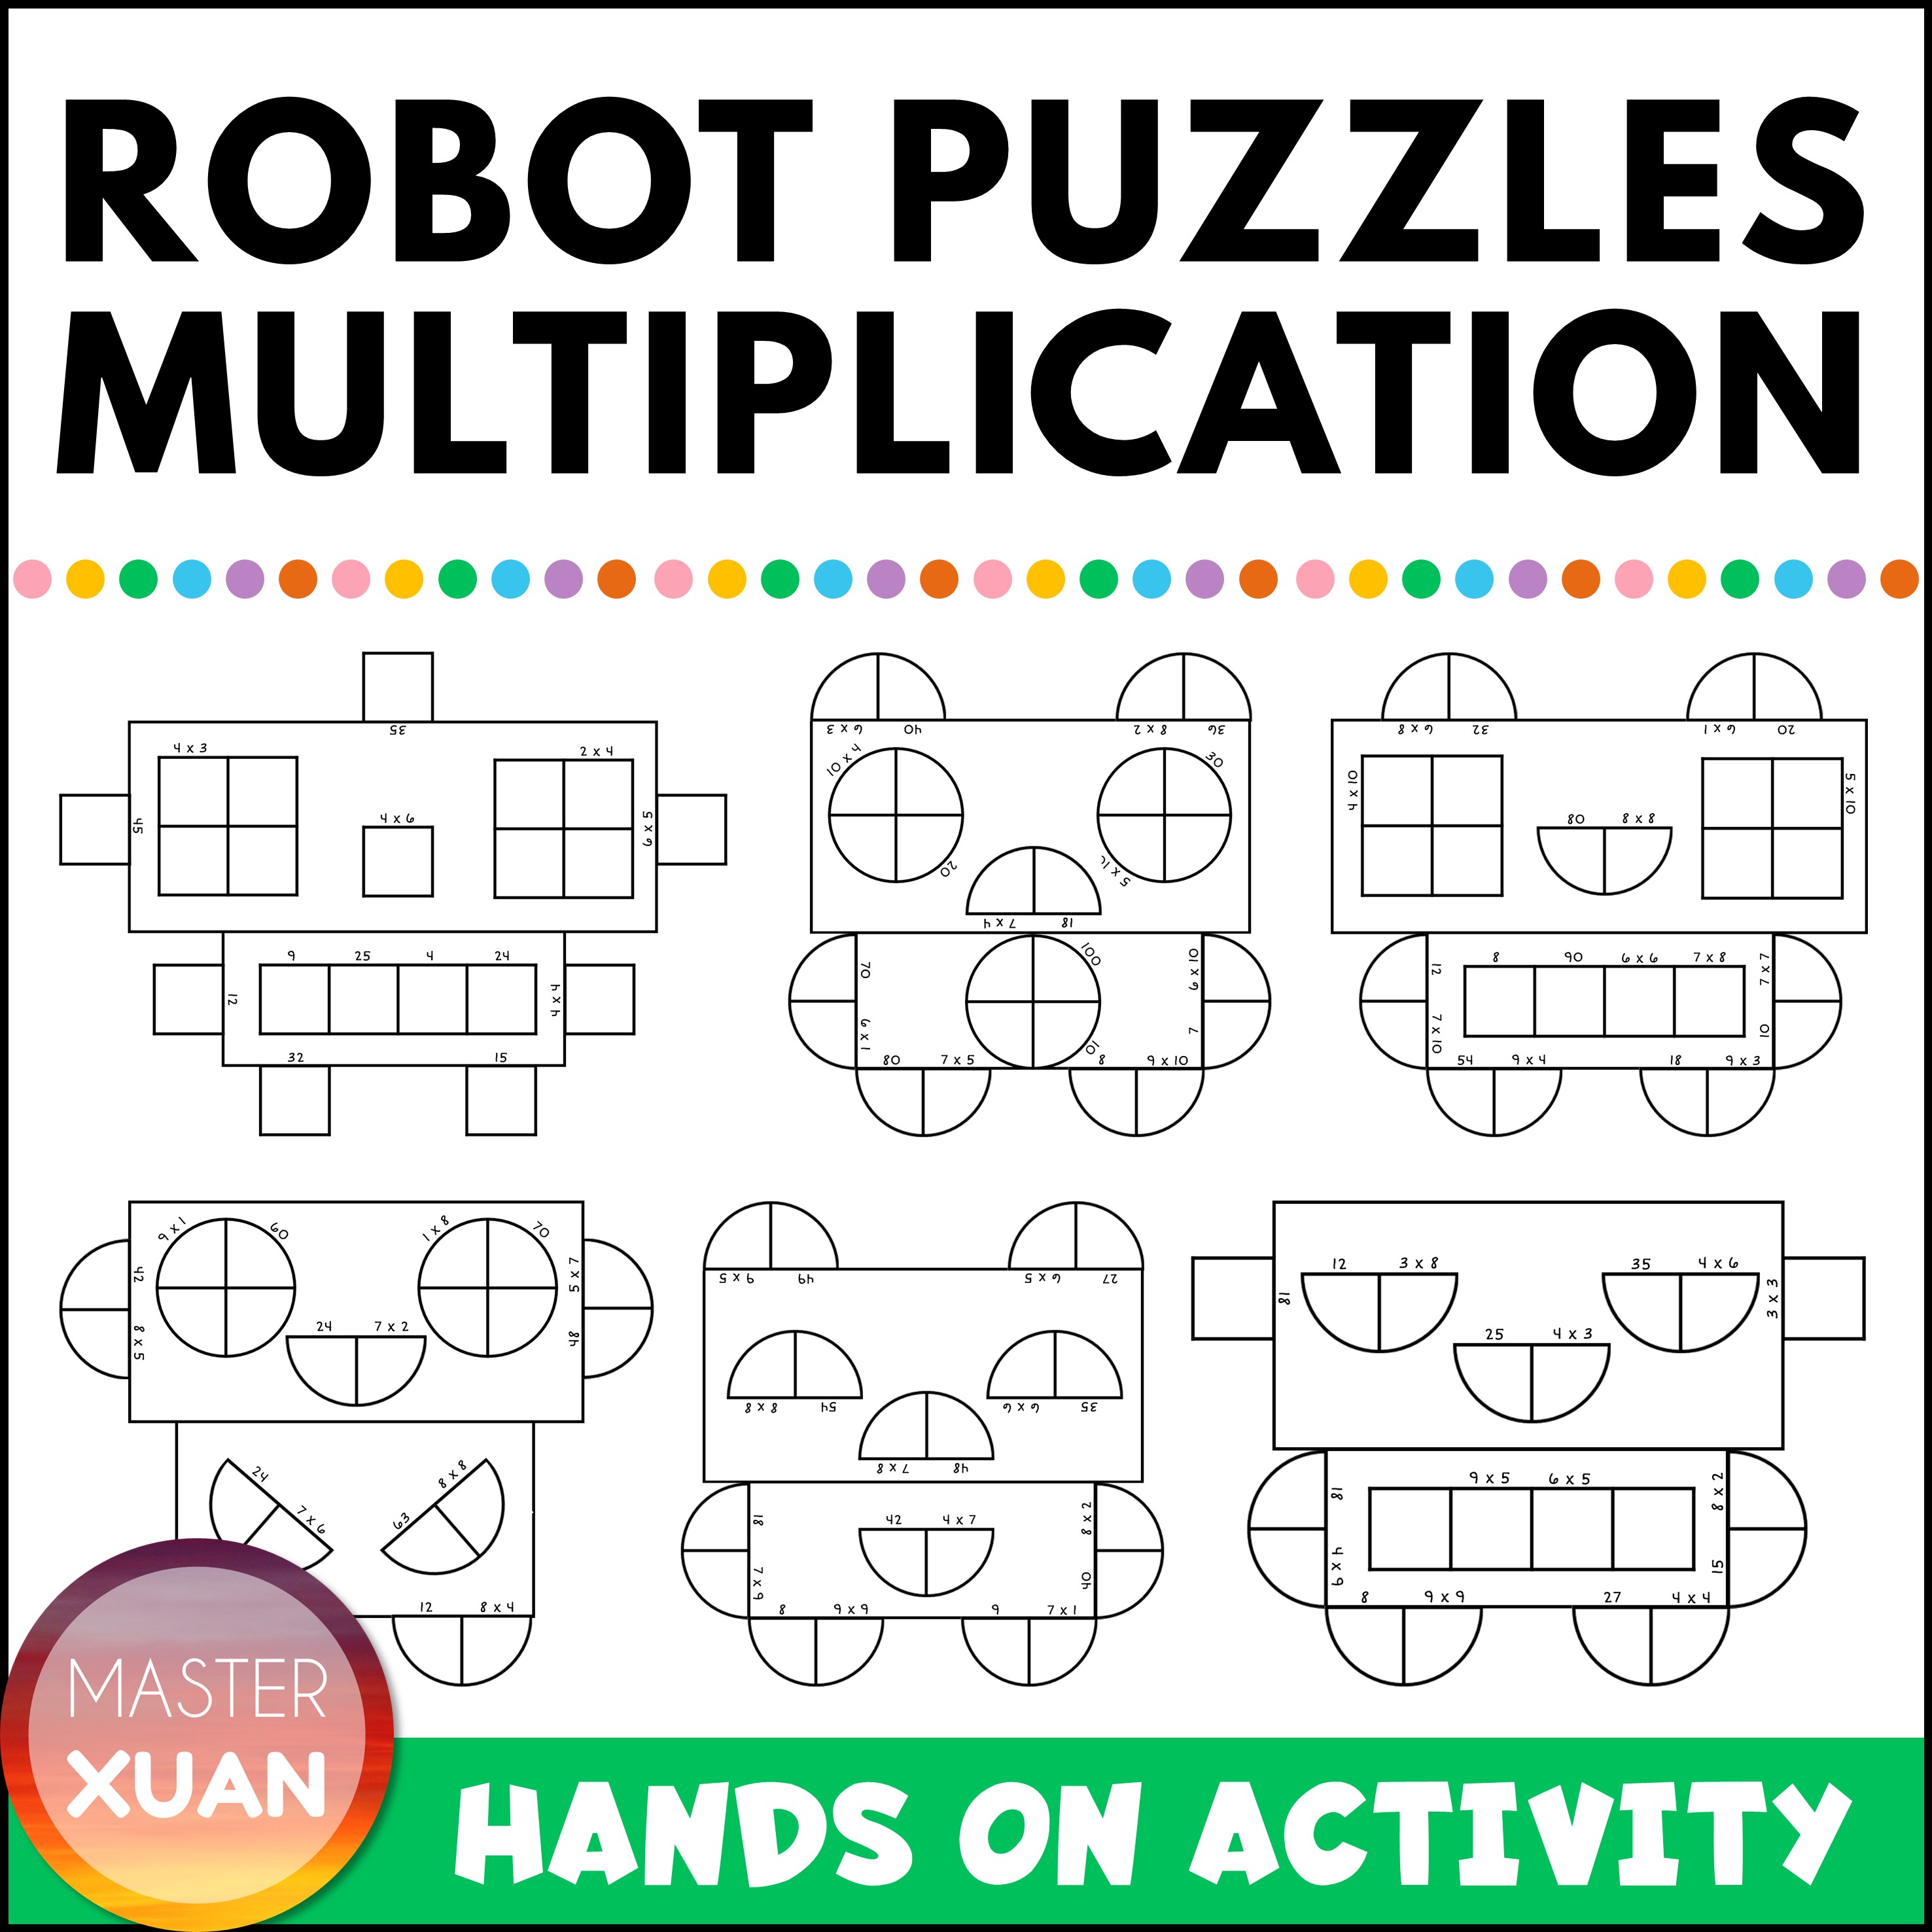 multiplication jigsaw with 6 robots